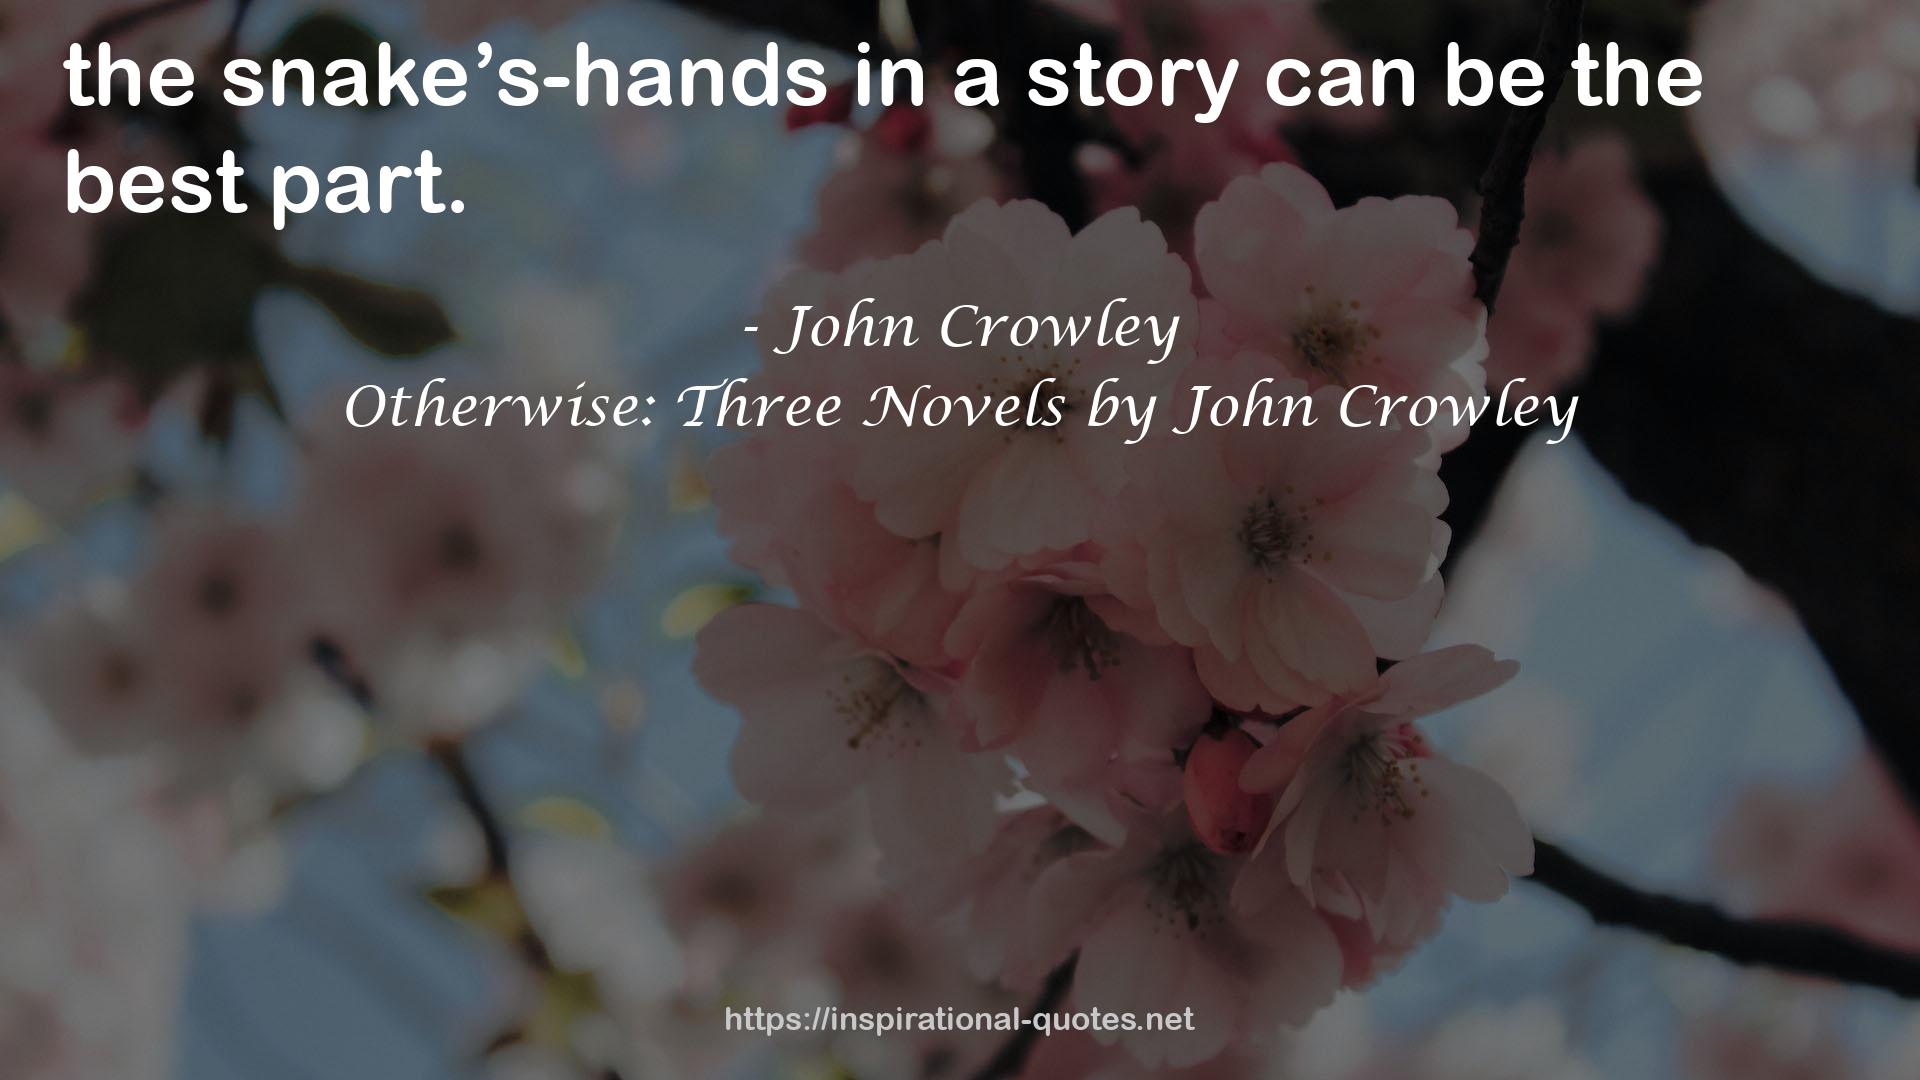 Otherwise: Three Novels by John Crowley QUOTES